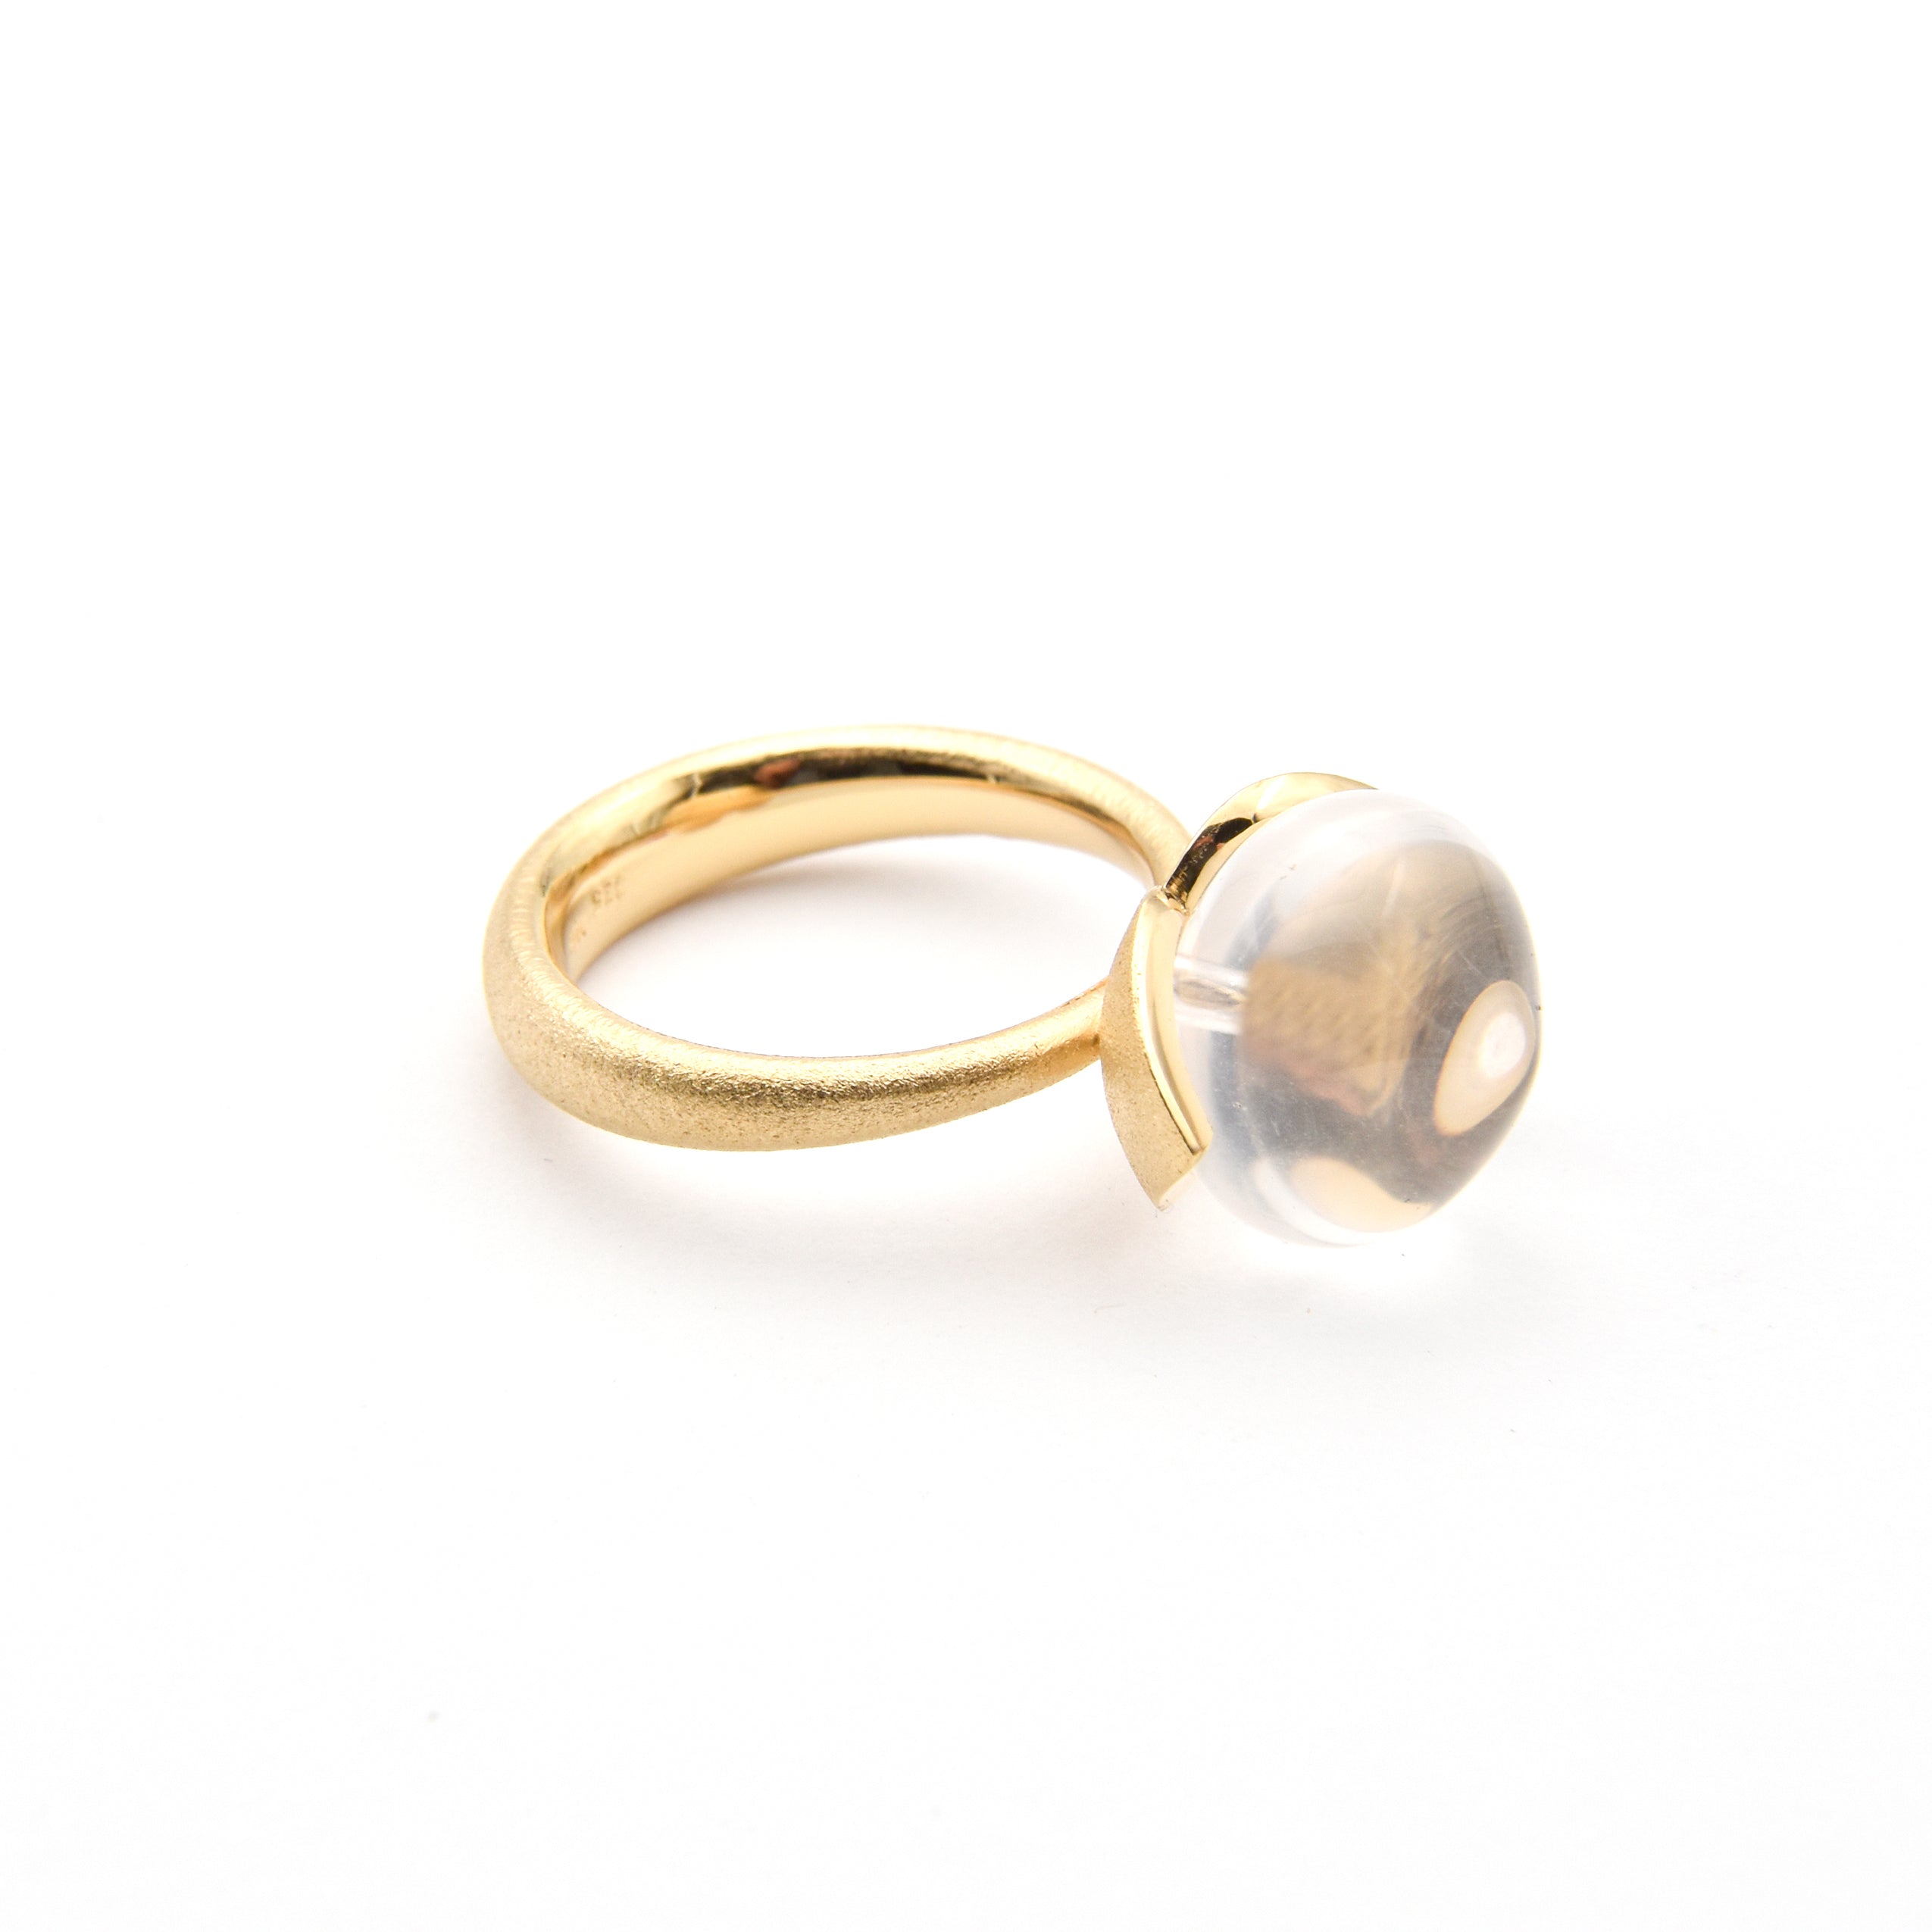 Dolce ring "big" with milky quartz 925/-